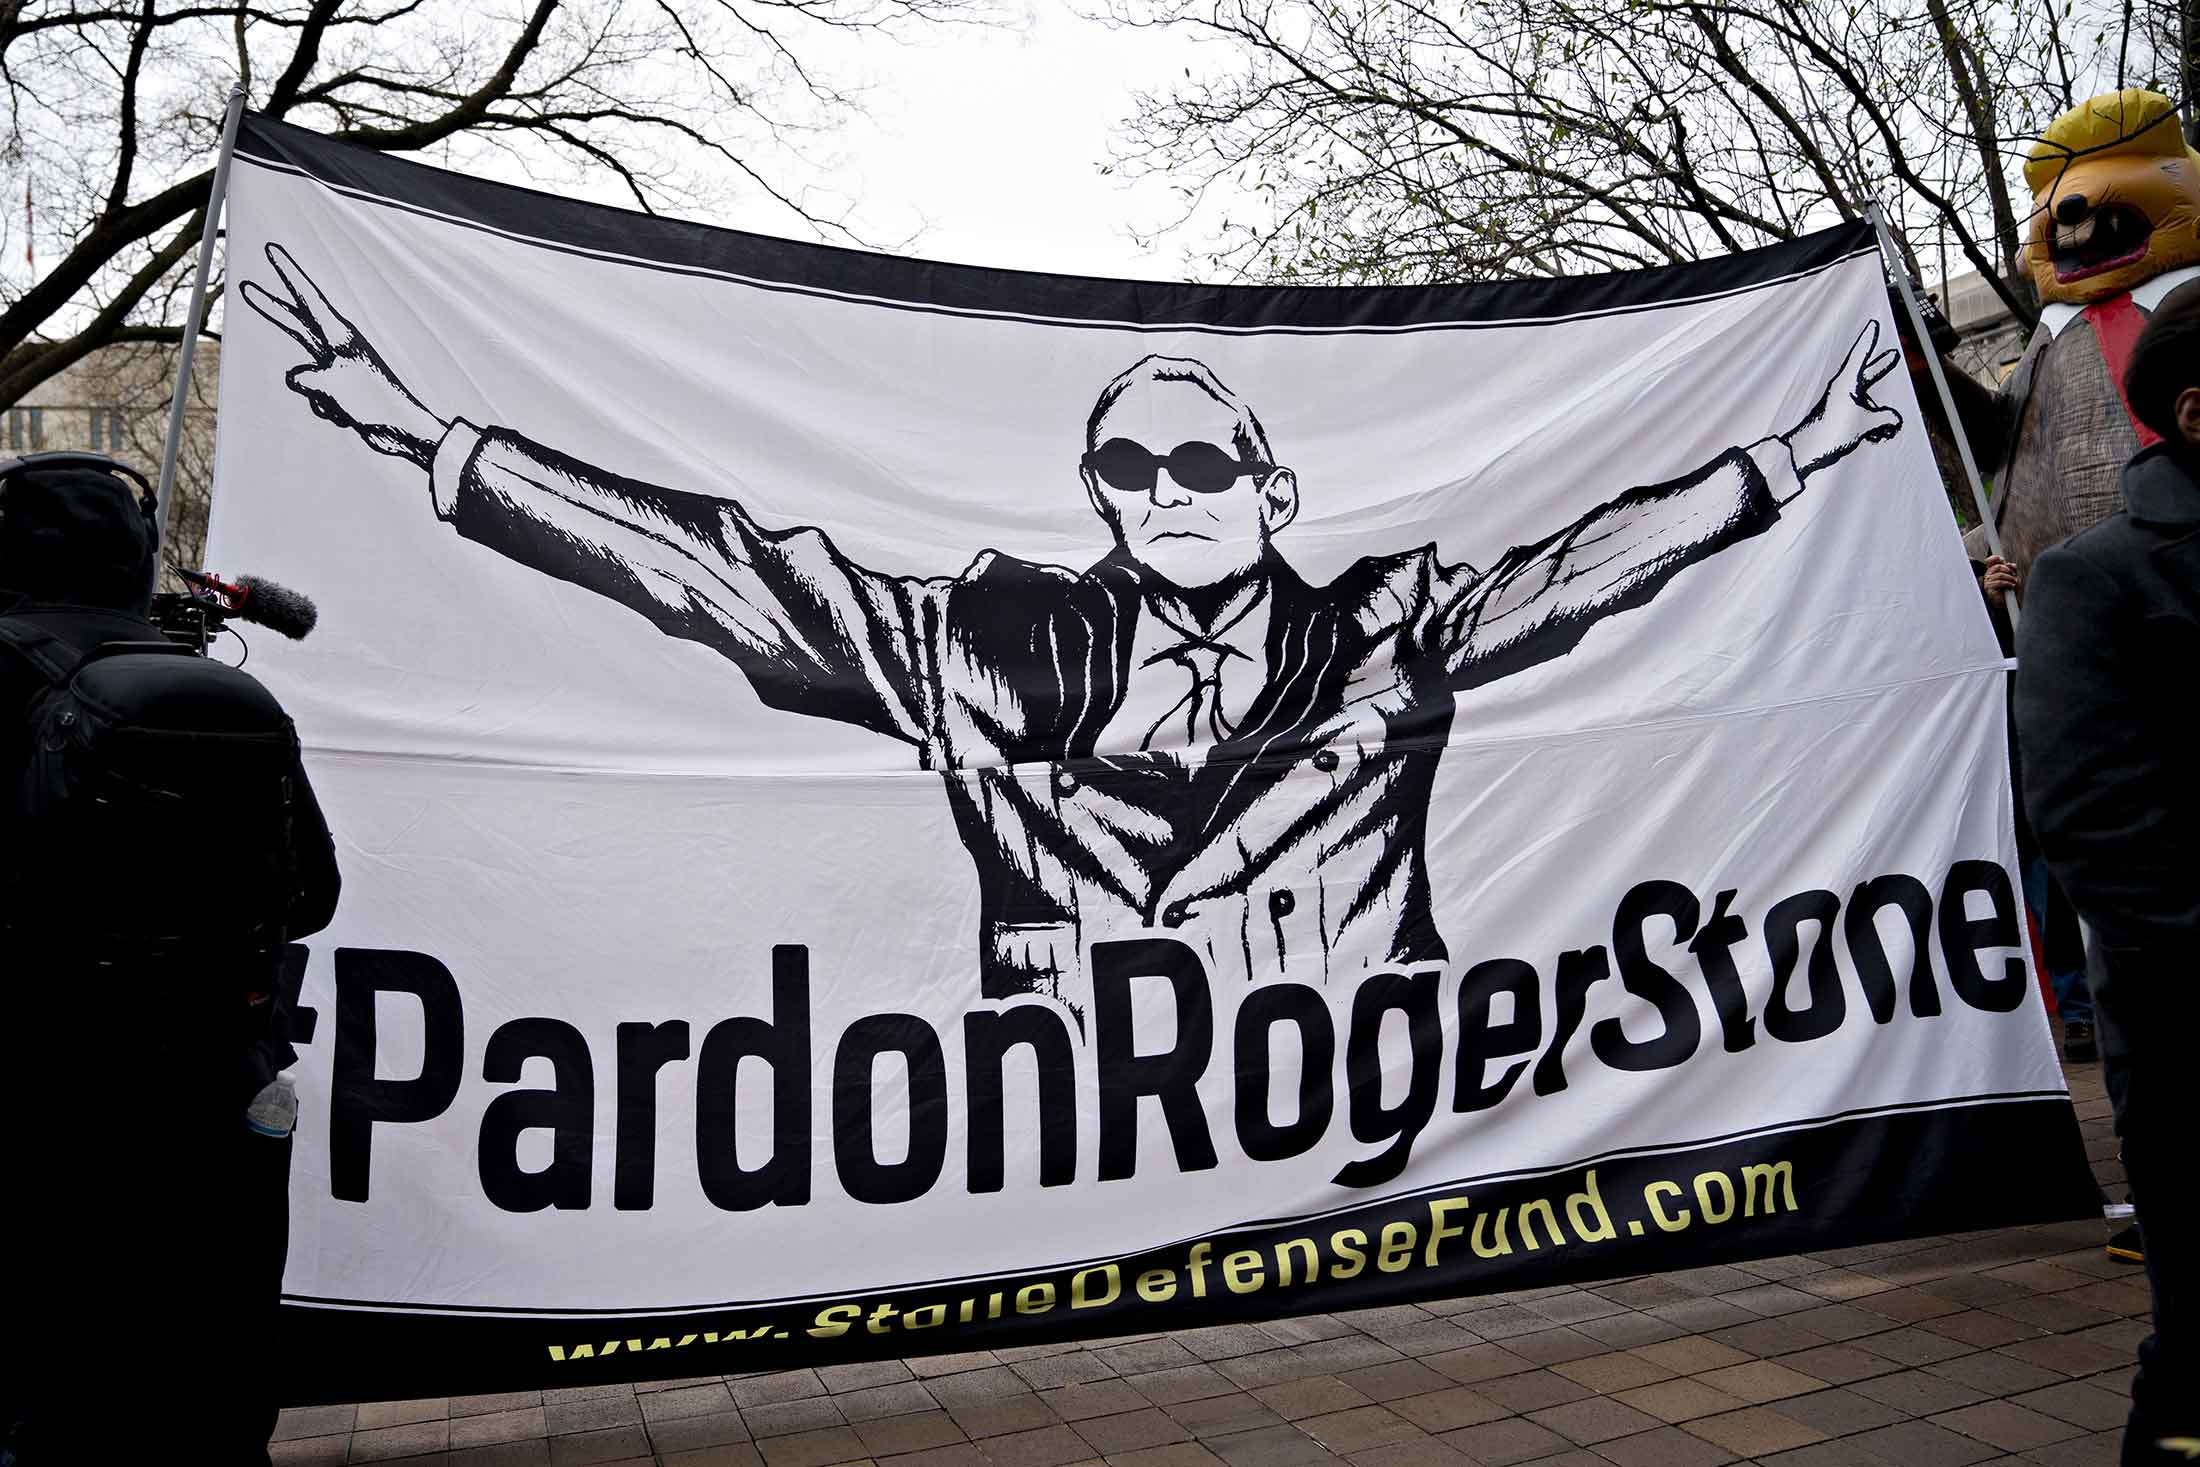 A banner outside federal court in Washington, D.C., on Feb. 20, 2020.